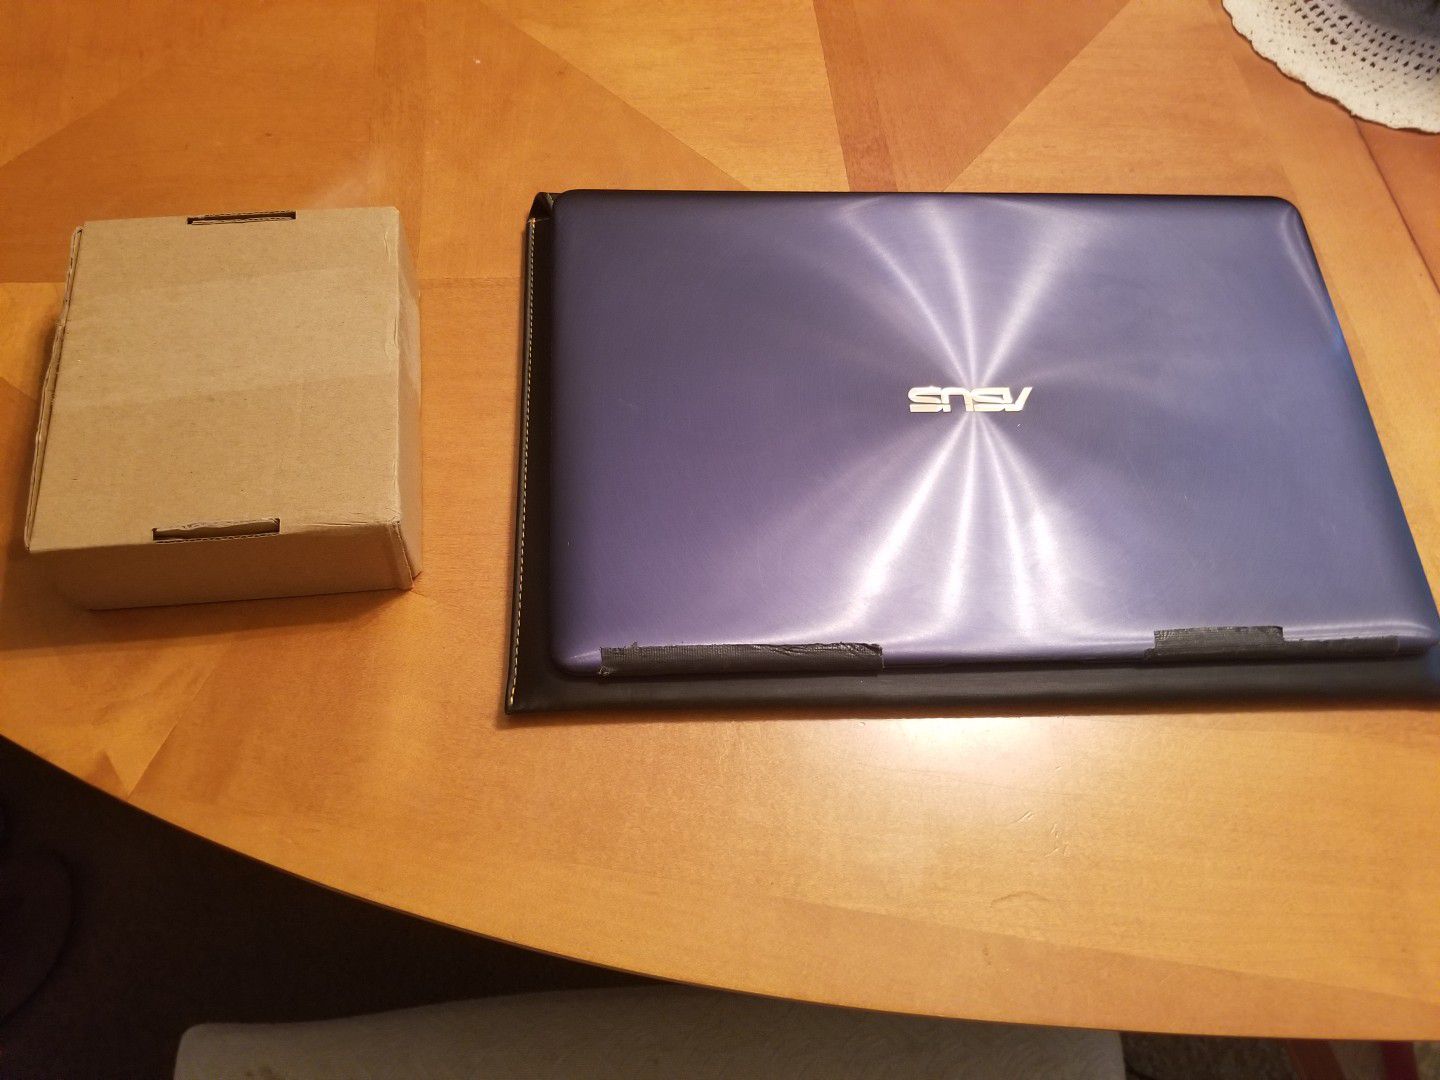 ASUS ZenBook 3 Deluxe 14" FHD Laptop Intel i7-8550U 4GHz 16GB DDR4 1TB NVME SSD MSO 2016 Win 10 Pro